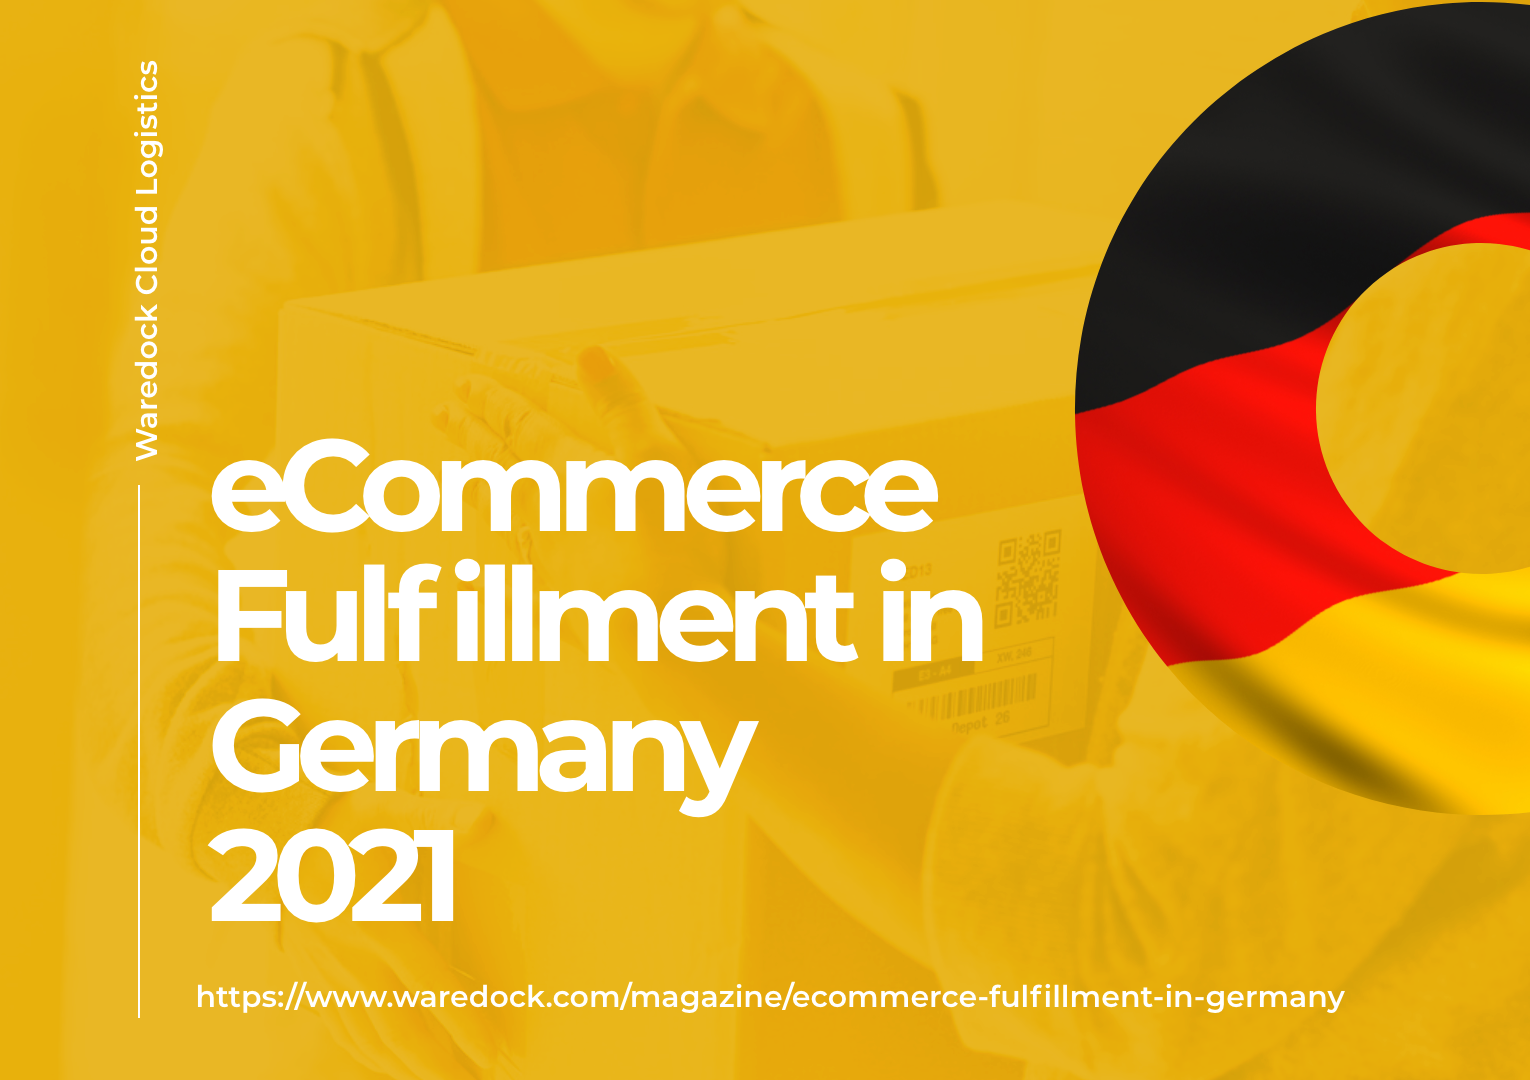 eCommerce Market Germany 2021 Research Market Analysis